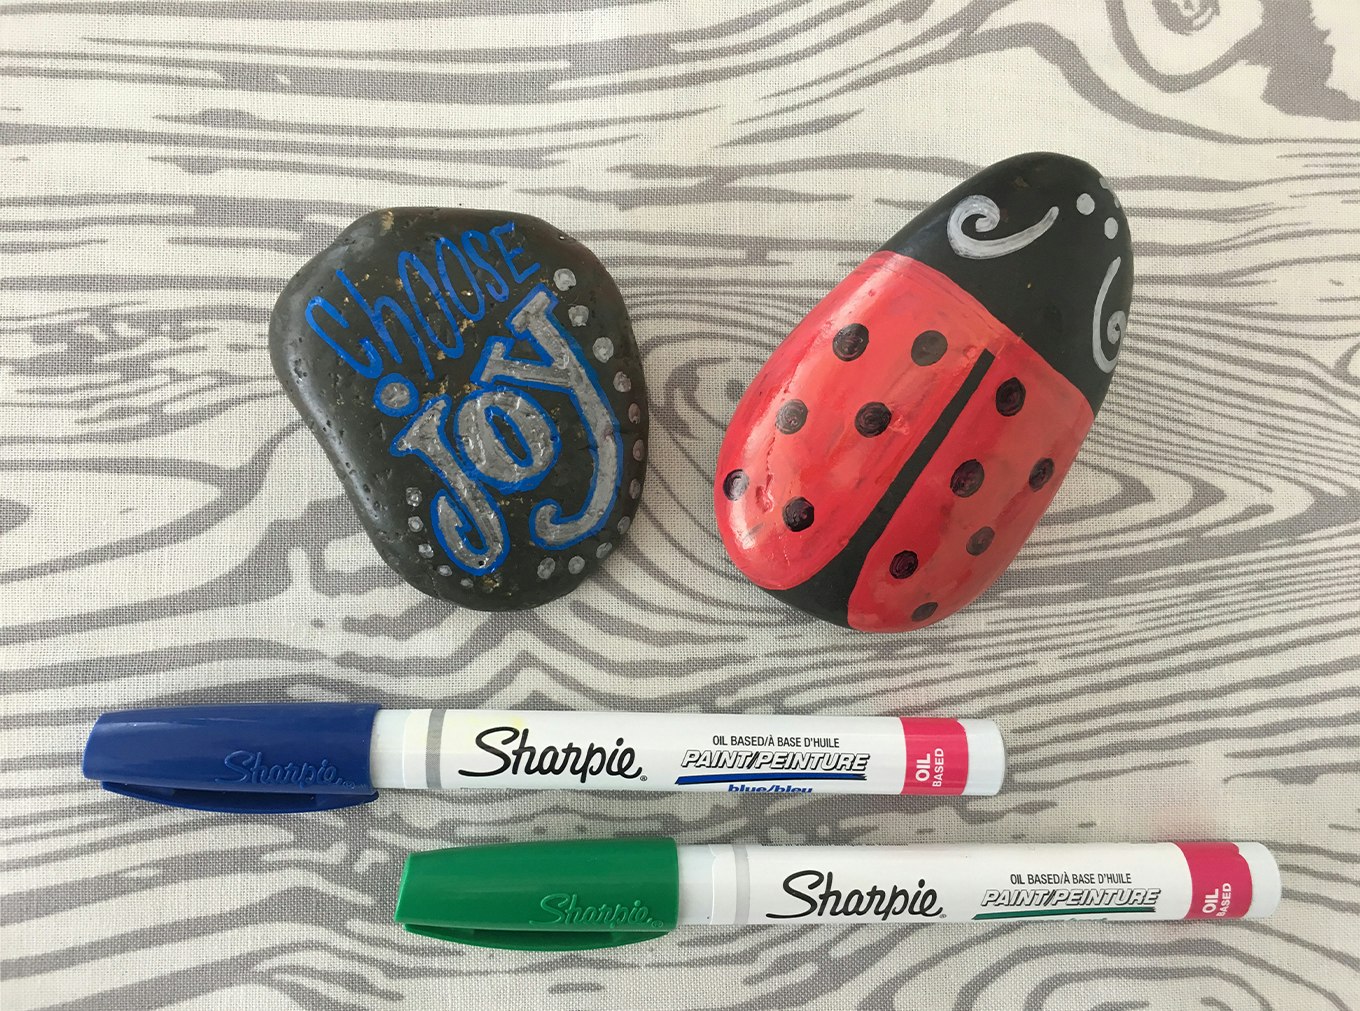 Rock Painting with Paint Markers